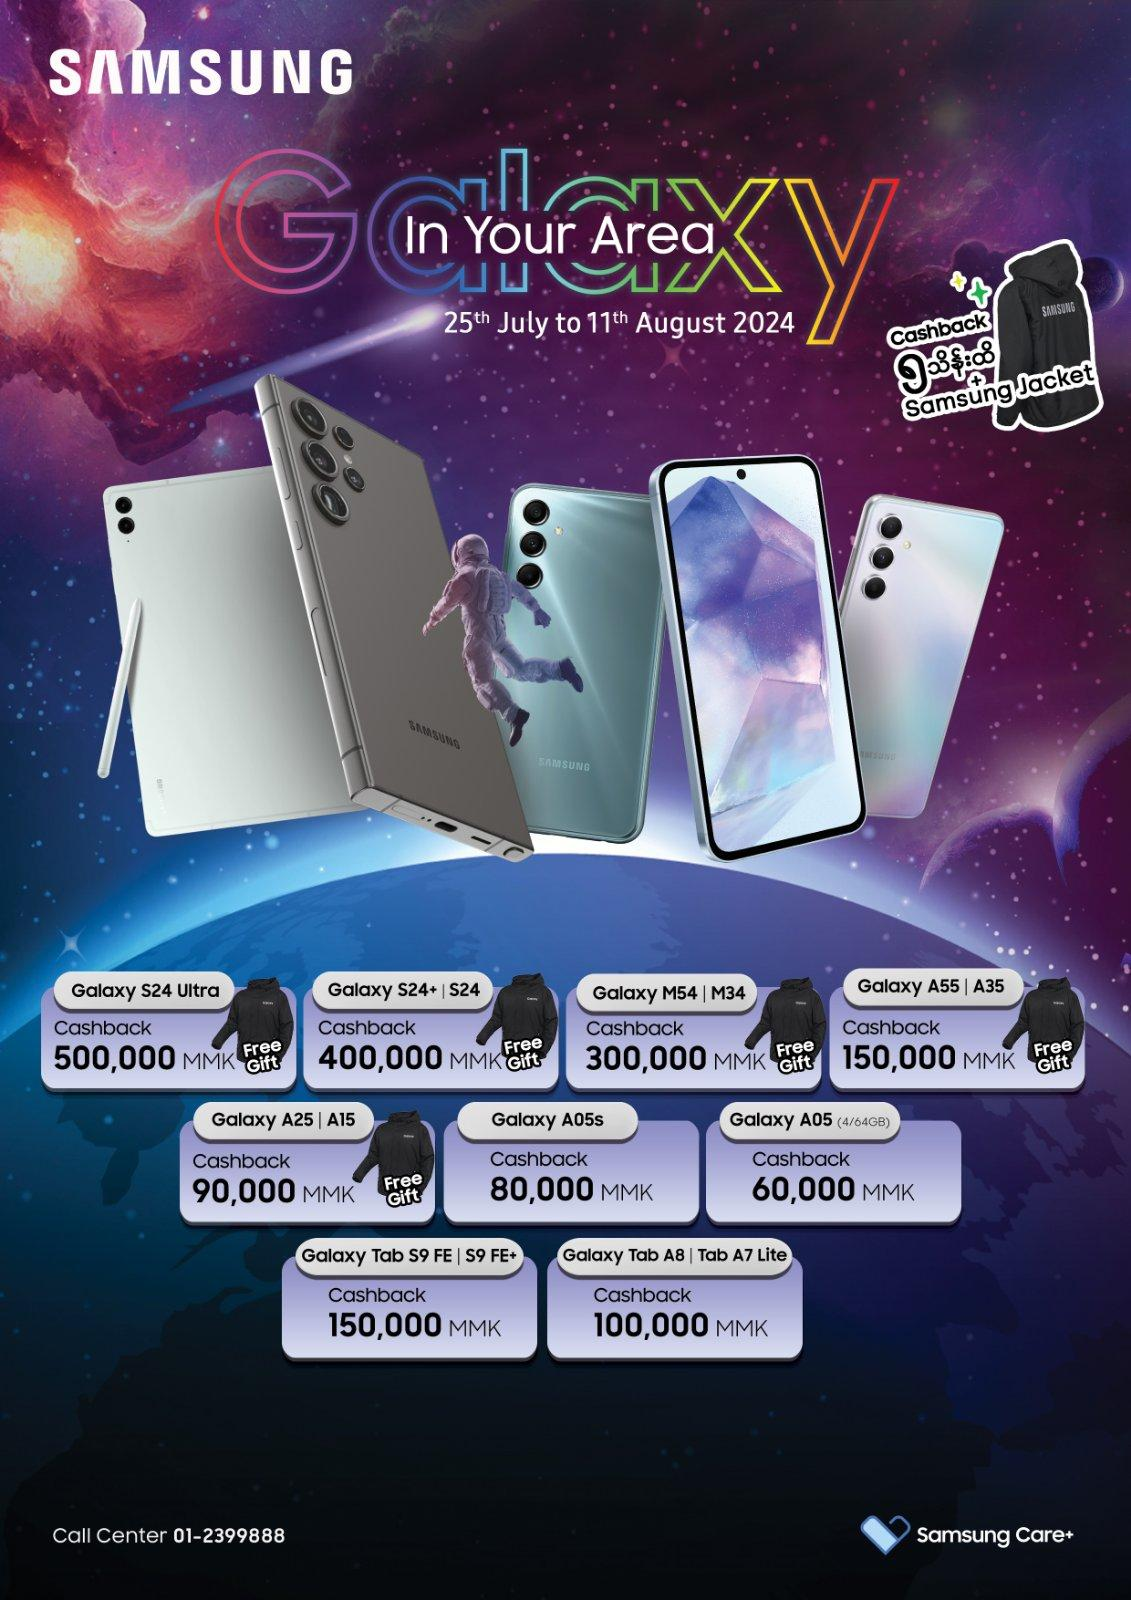 Samsung Galaxy In Your Area Promotion (25 July - 11 August)